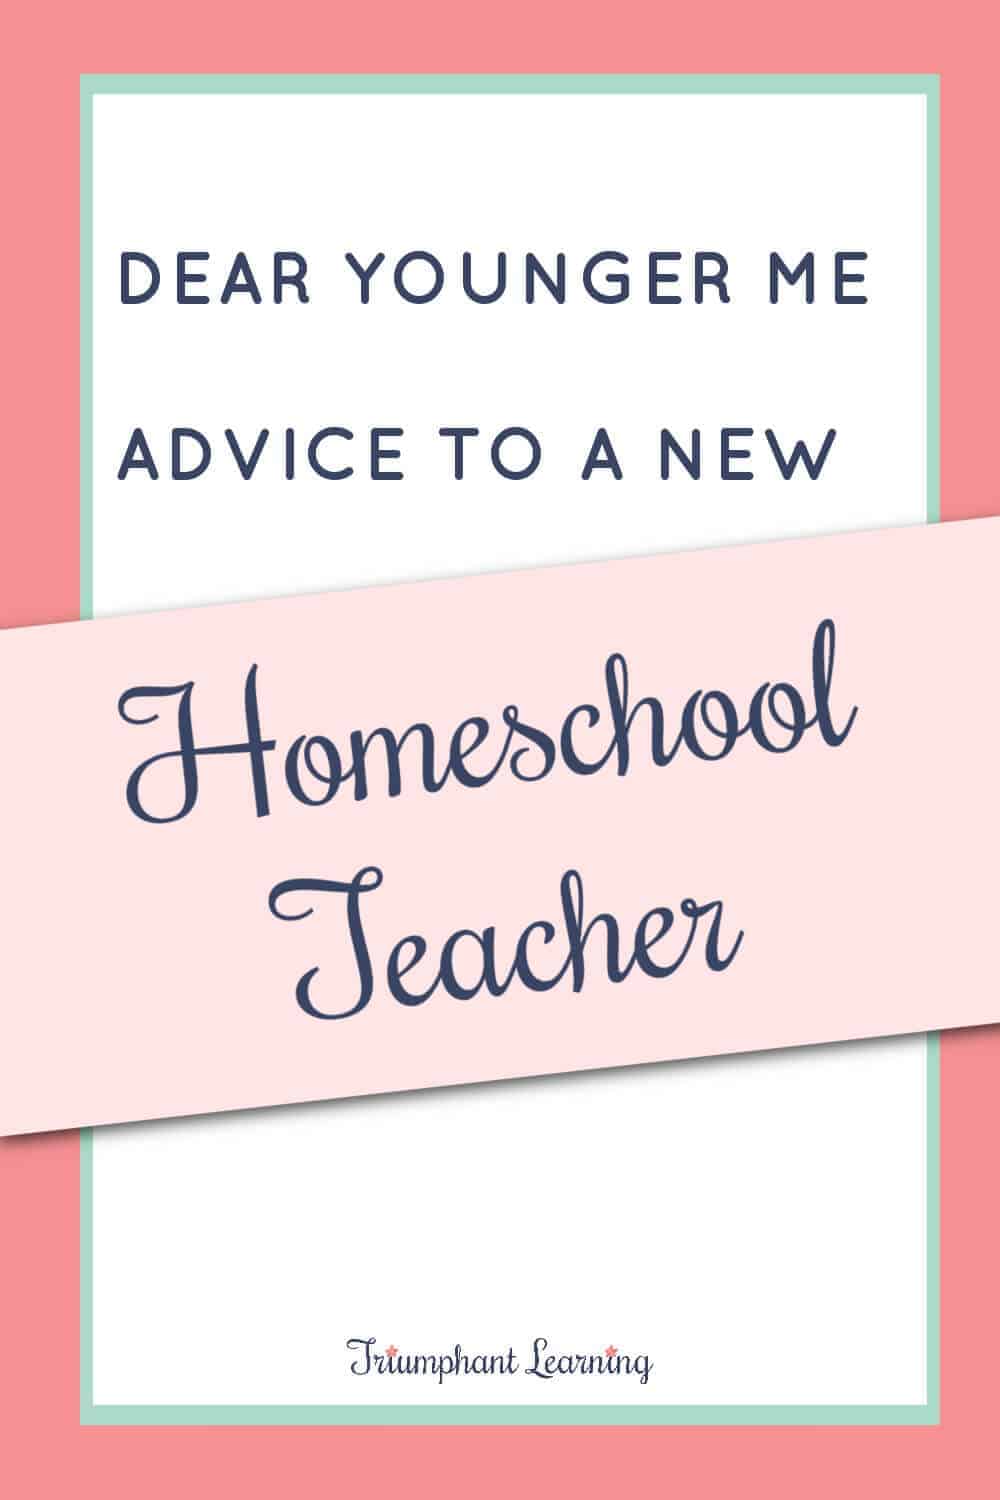 As a new homeschool parent, you have lots of questions. This is the homeschool advice I wish I had received when we started our journey. via @TriLearning